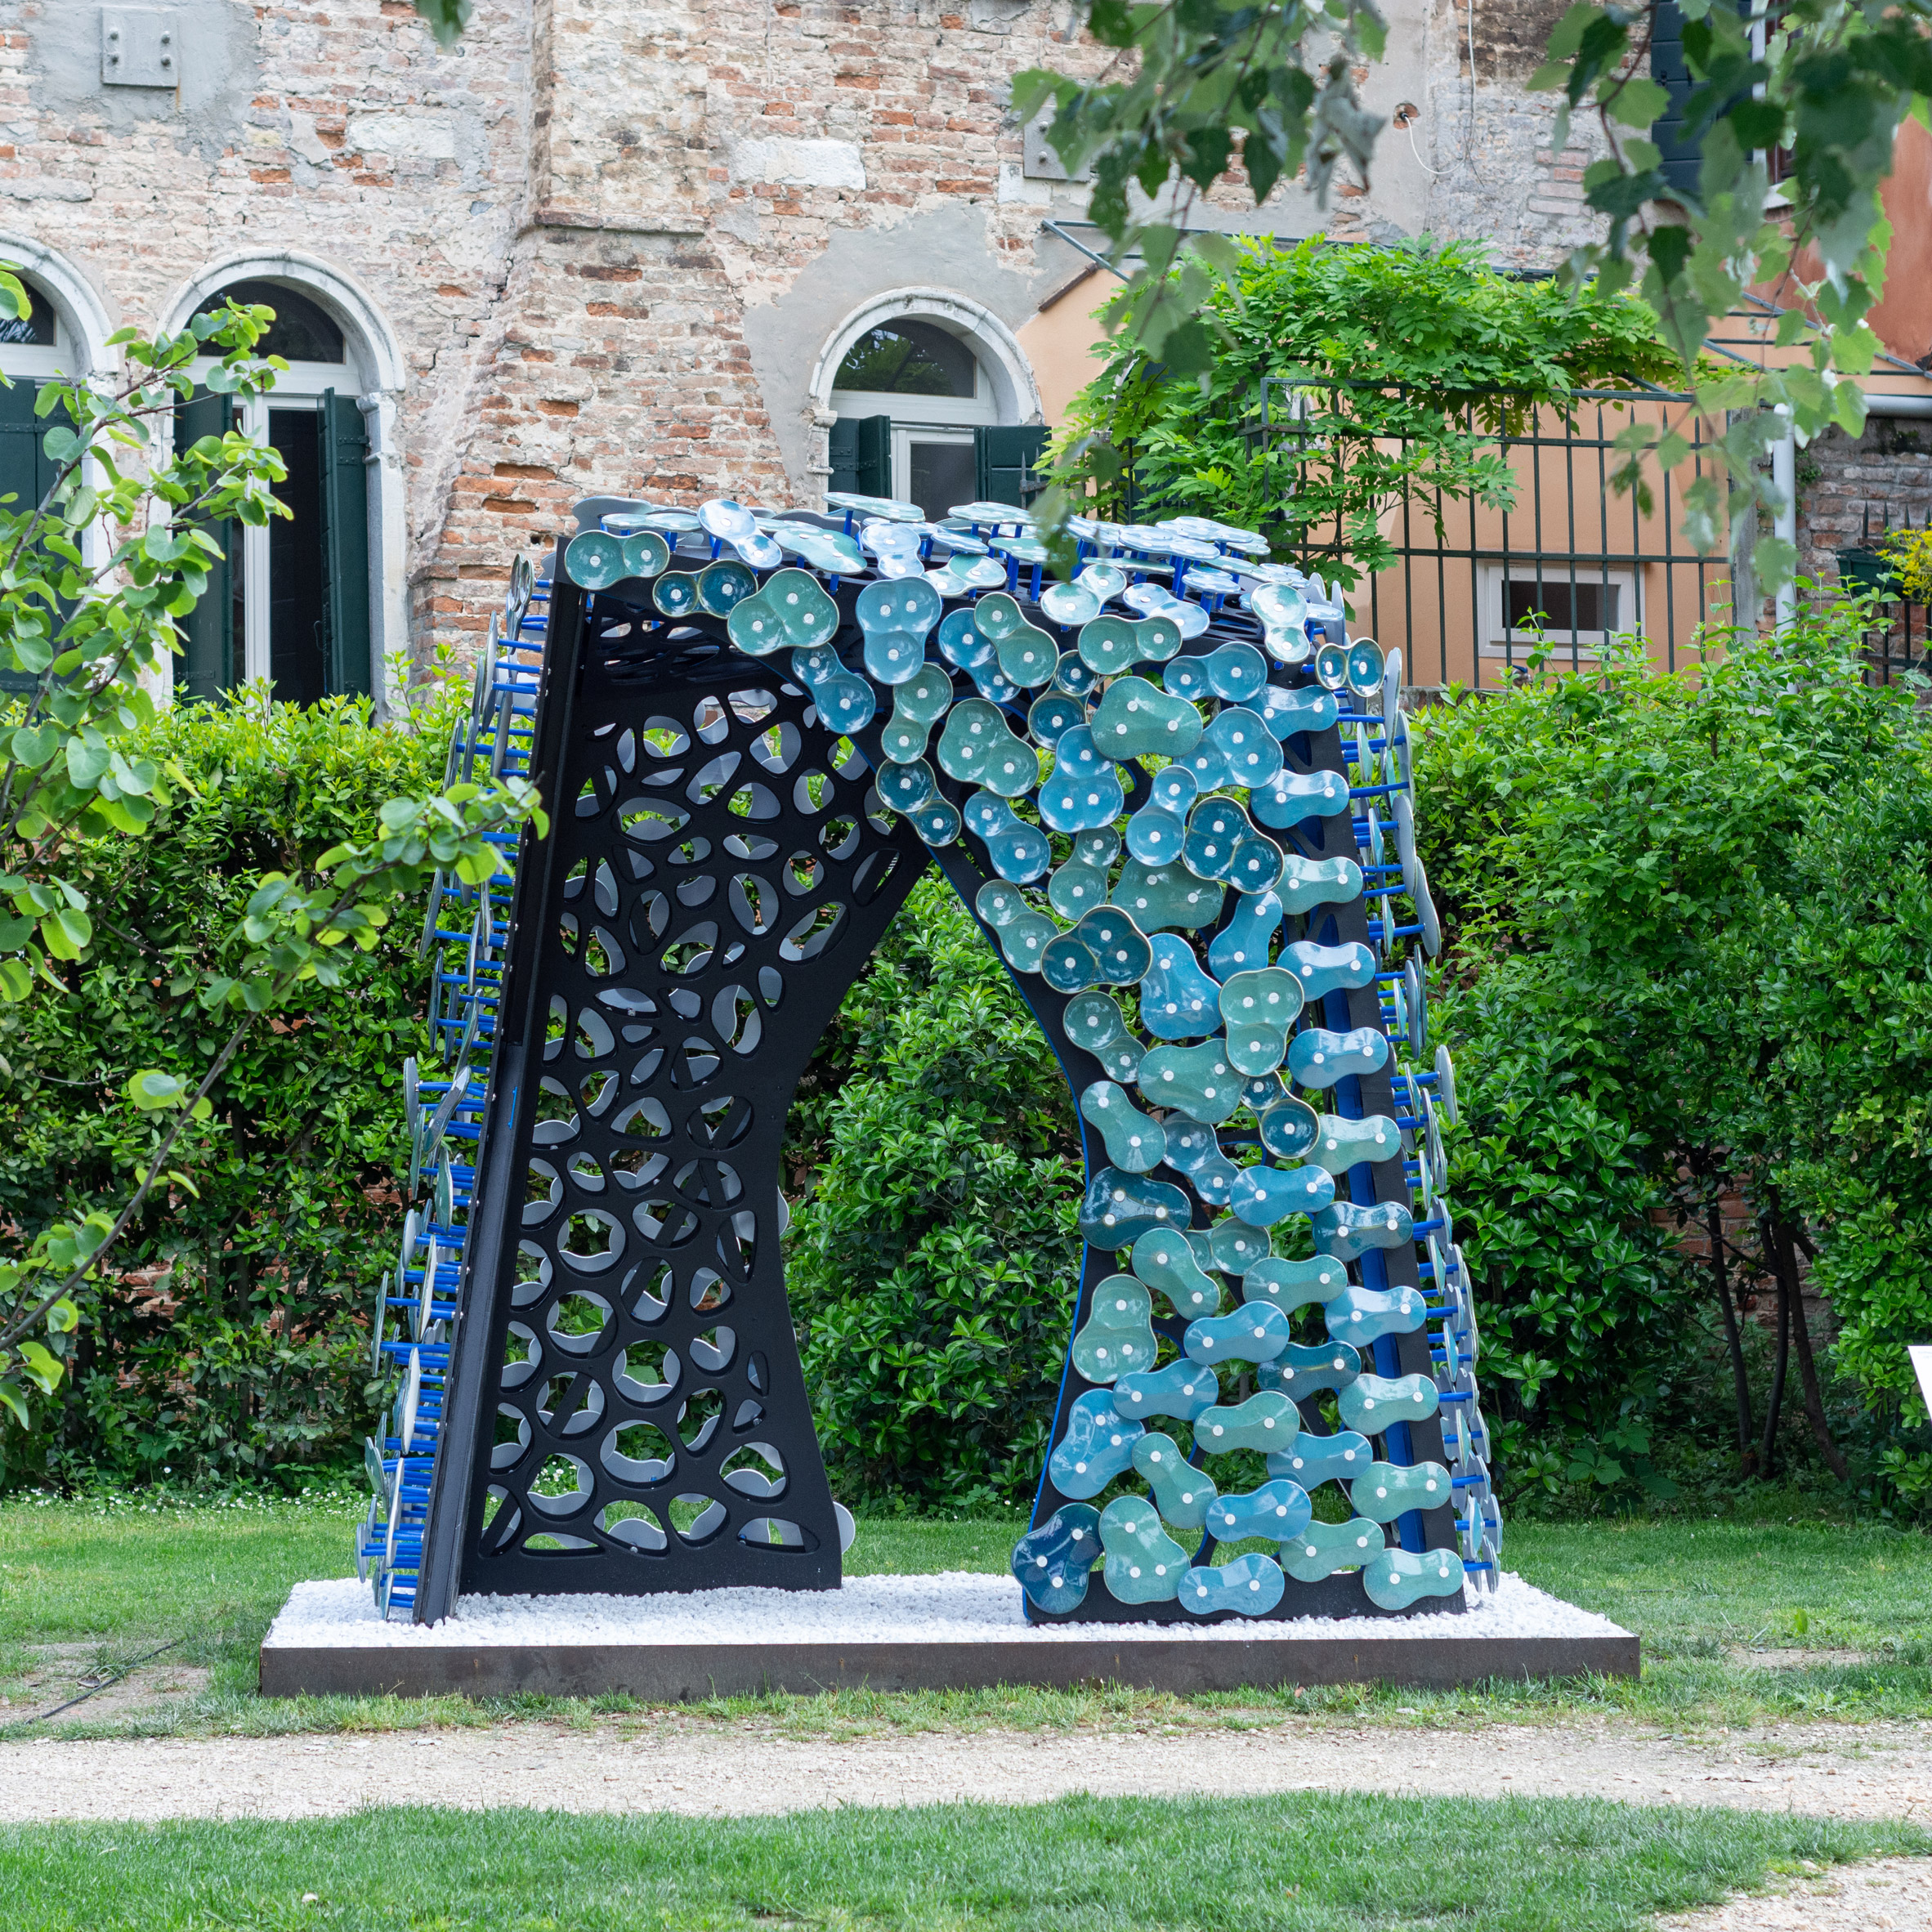 Architectural sculpture made from blue-coloured metal pieces